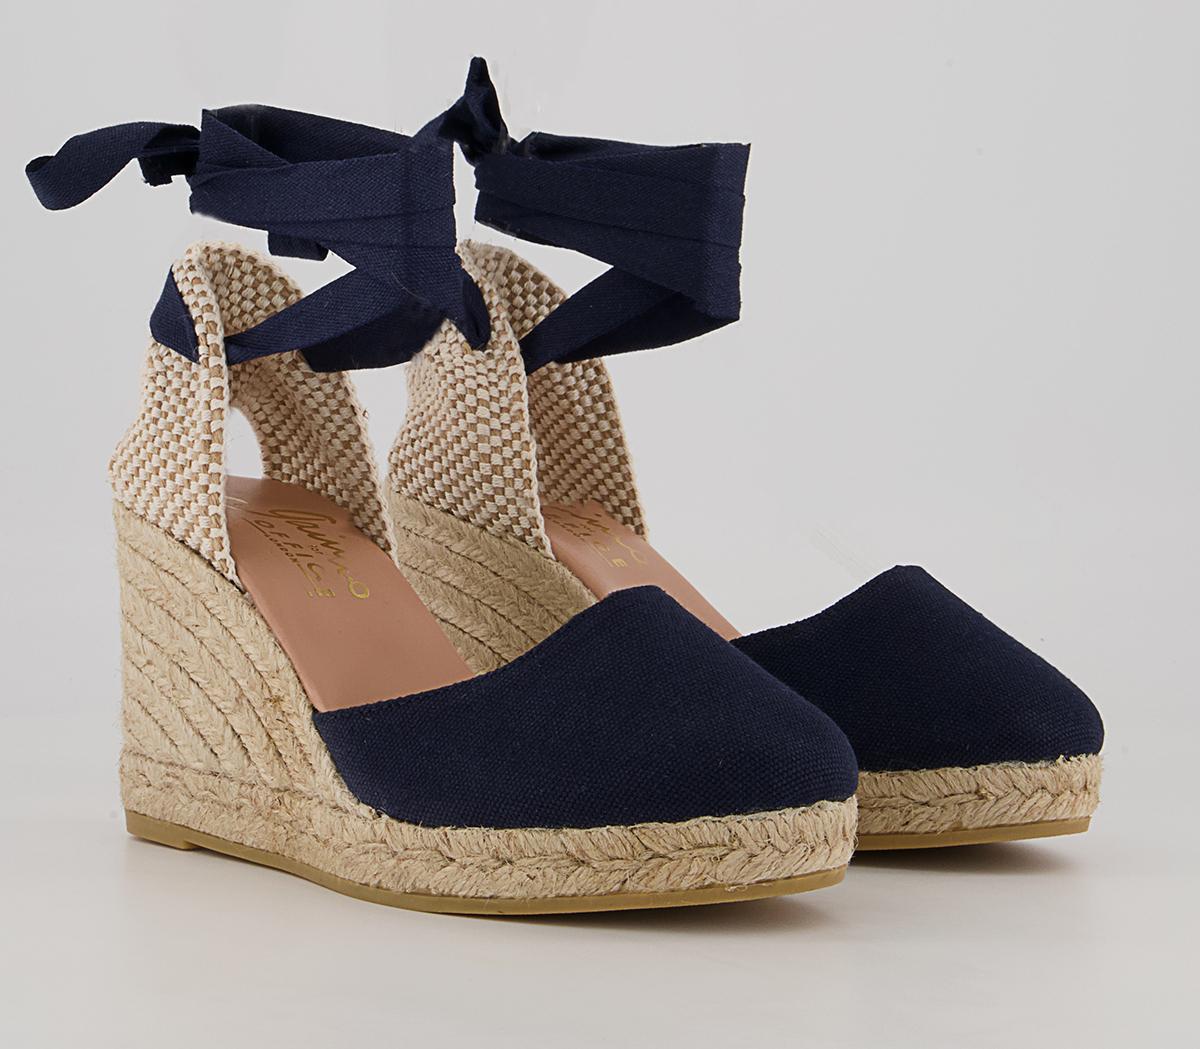 Gaimo for OFFICE Ankle Tie Espadrille Wedges Navy Canvas - Mid Heels